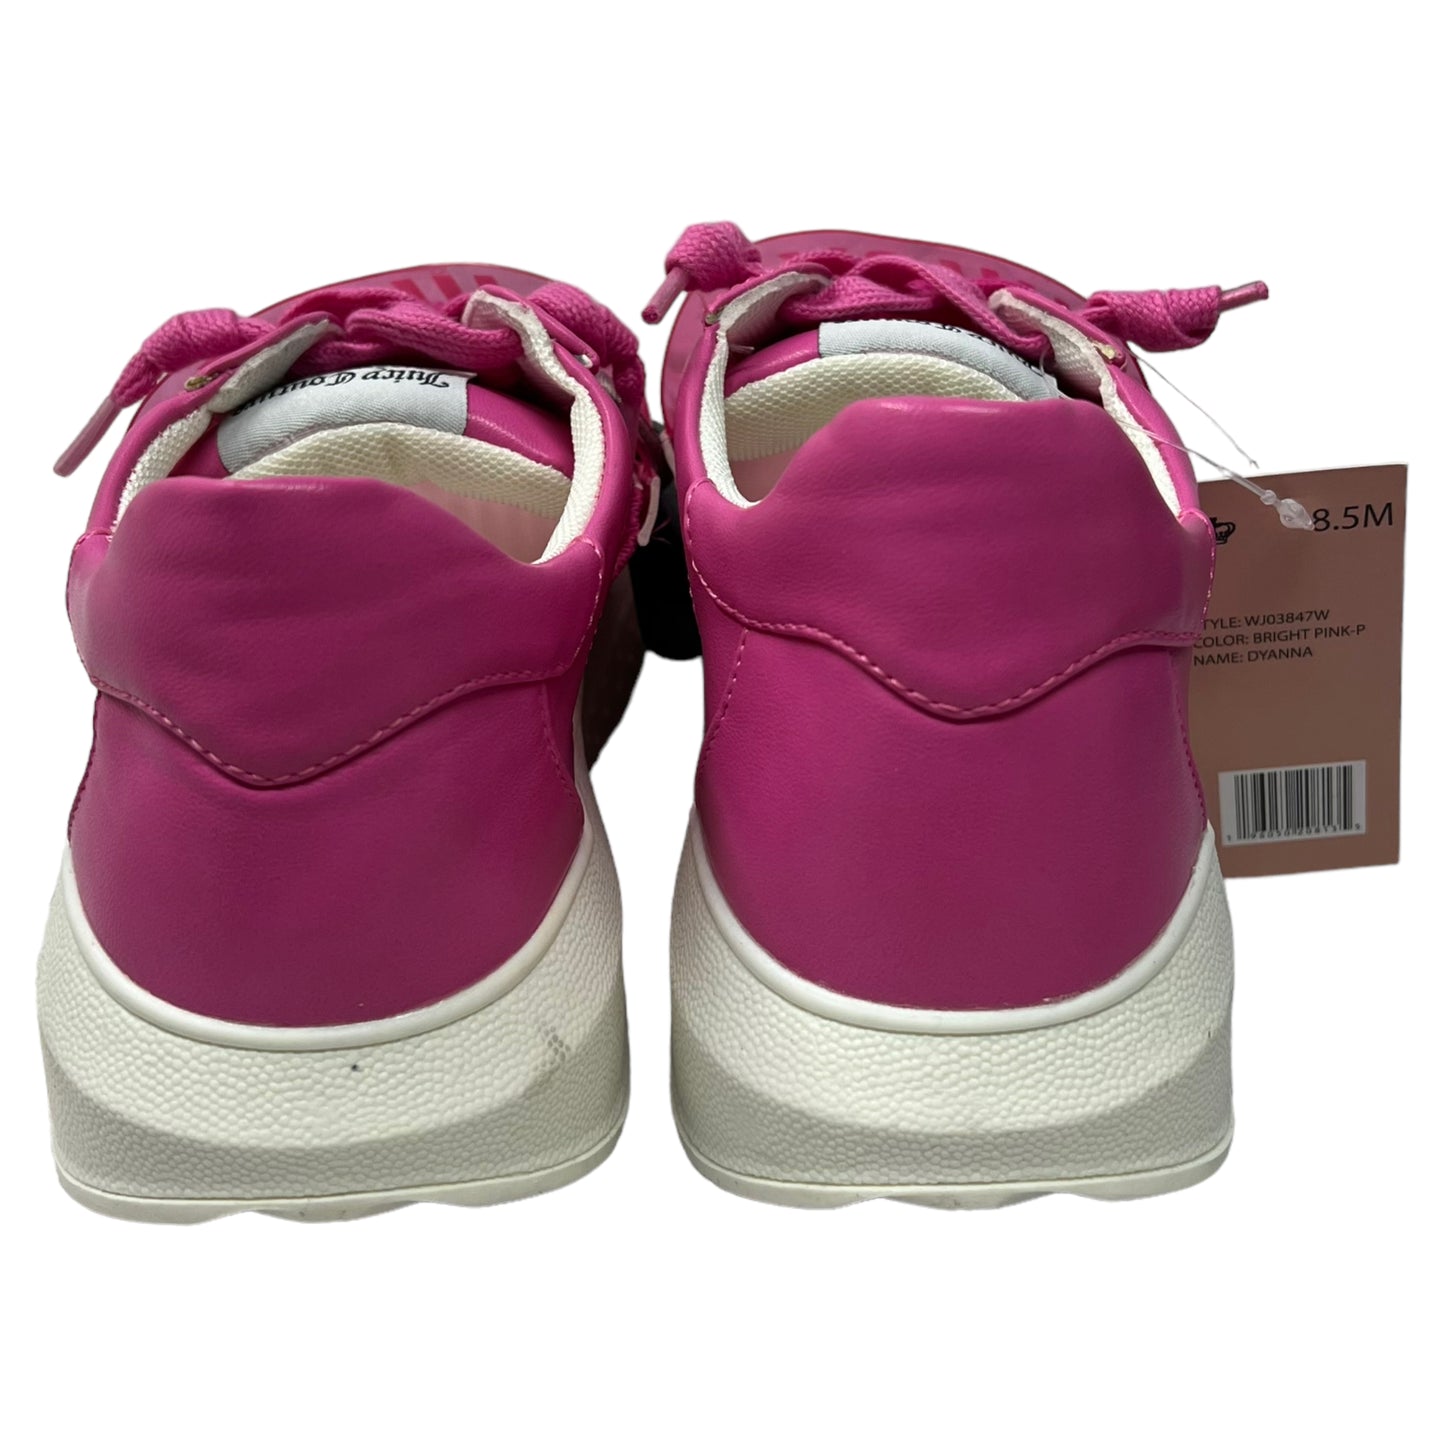 Shoes Sneakers By Juicy Couture  Size: 8.5